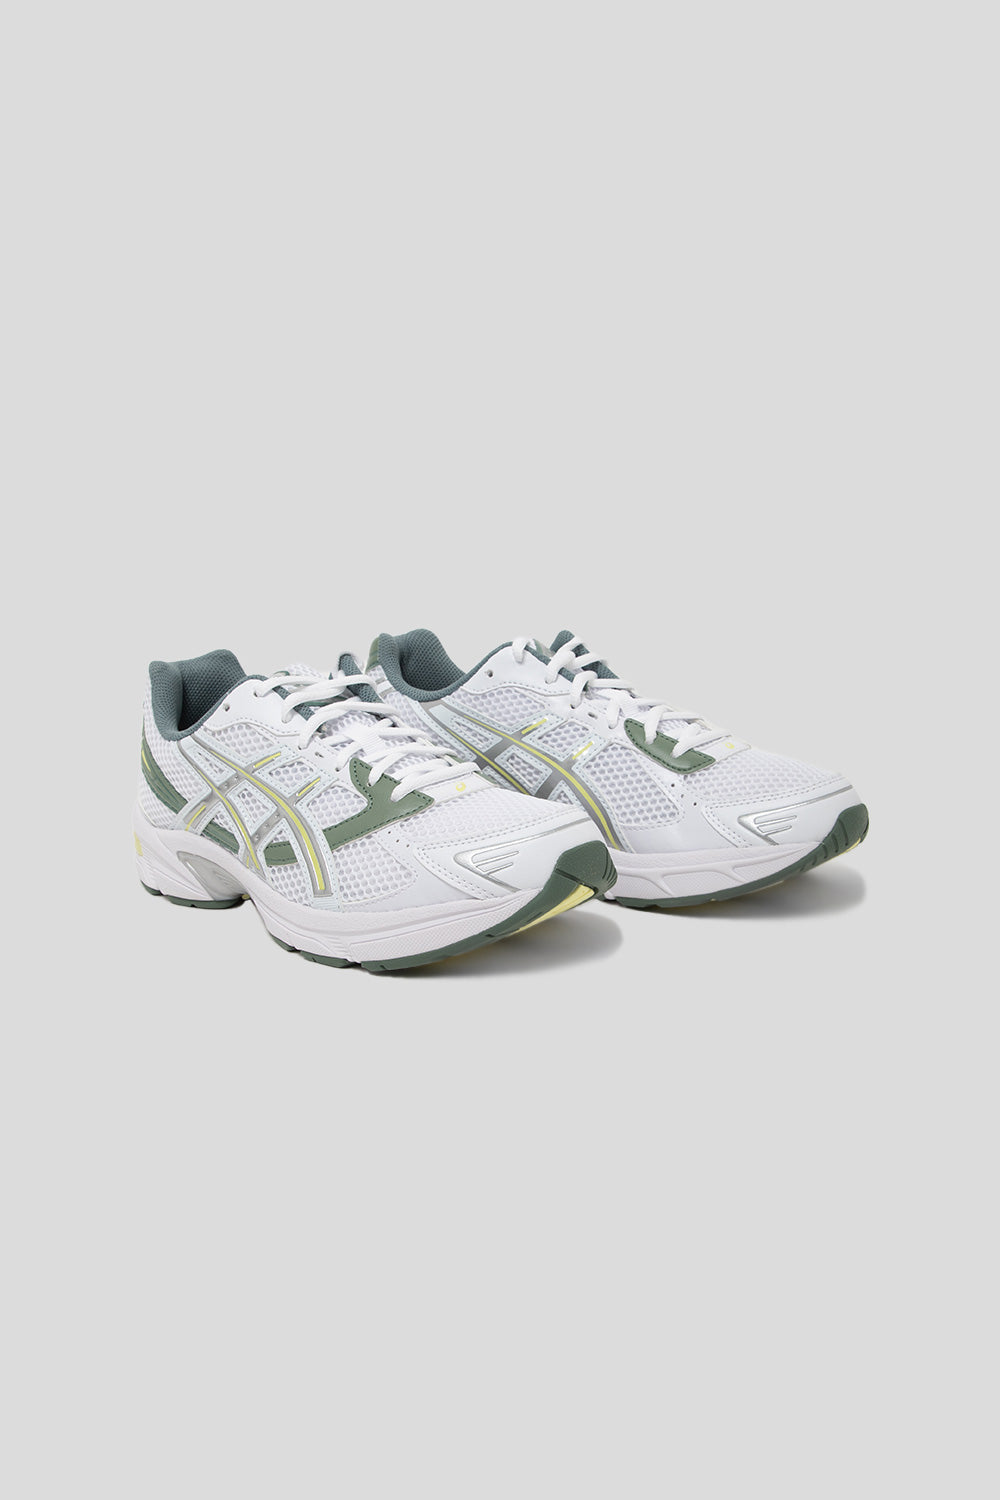 Asics Gel-1130 Shoe in White and Huddle Yellow